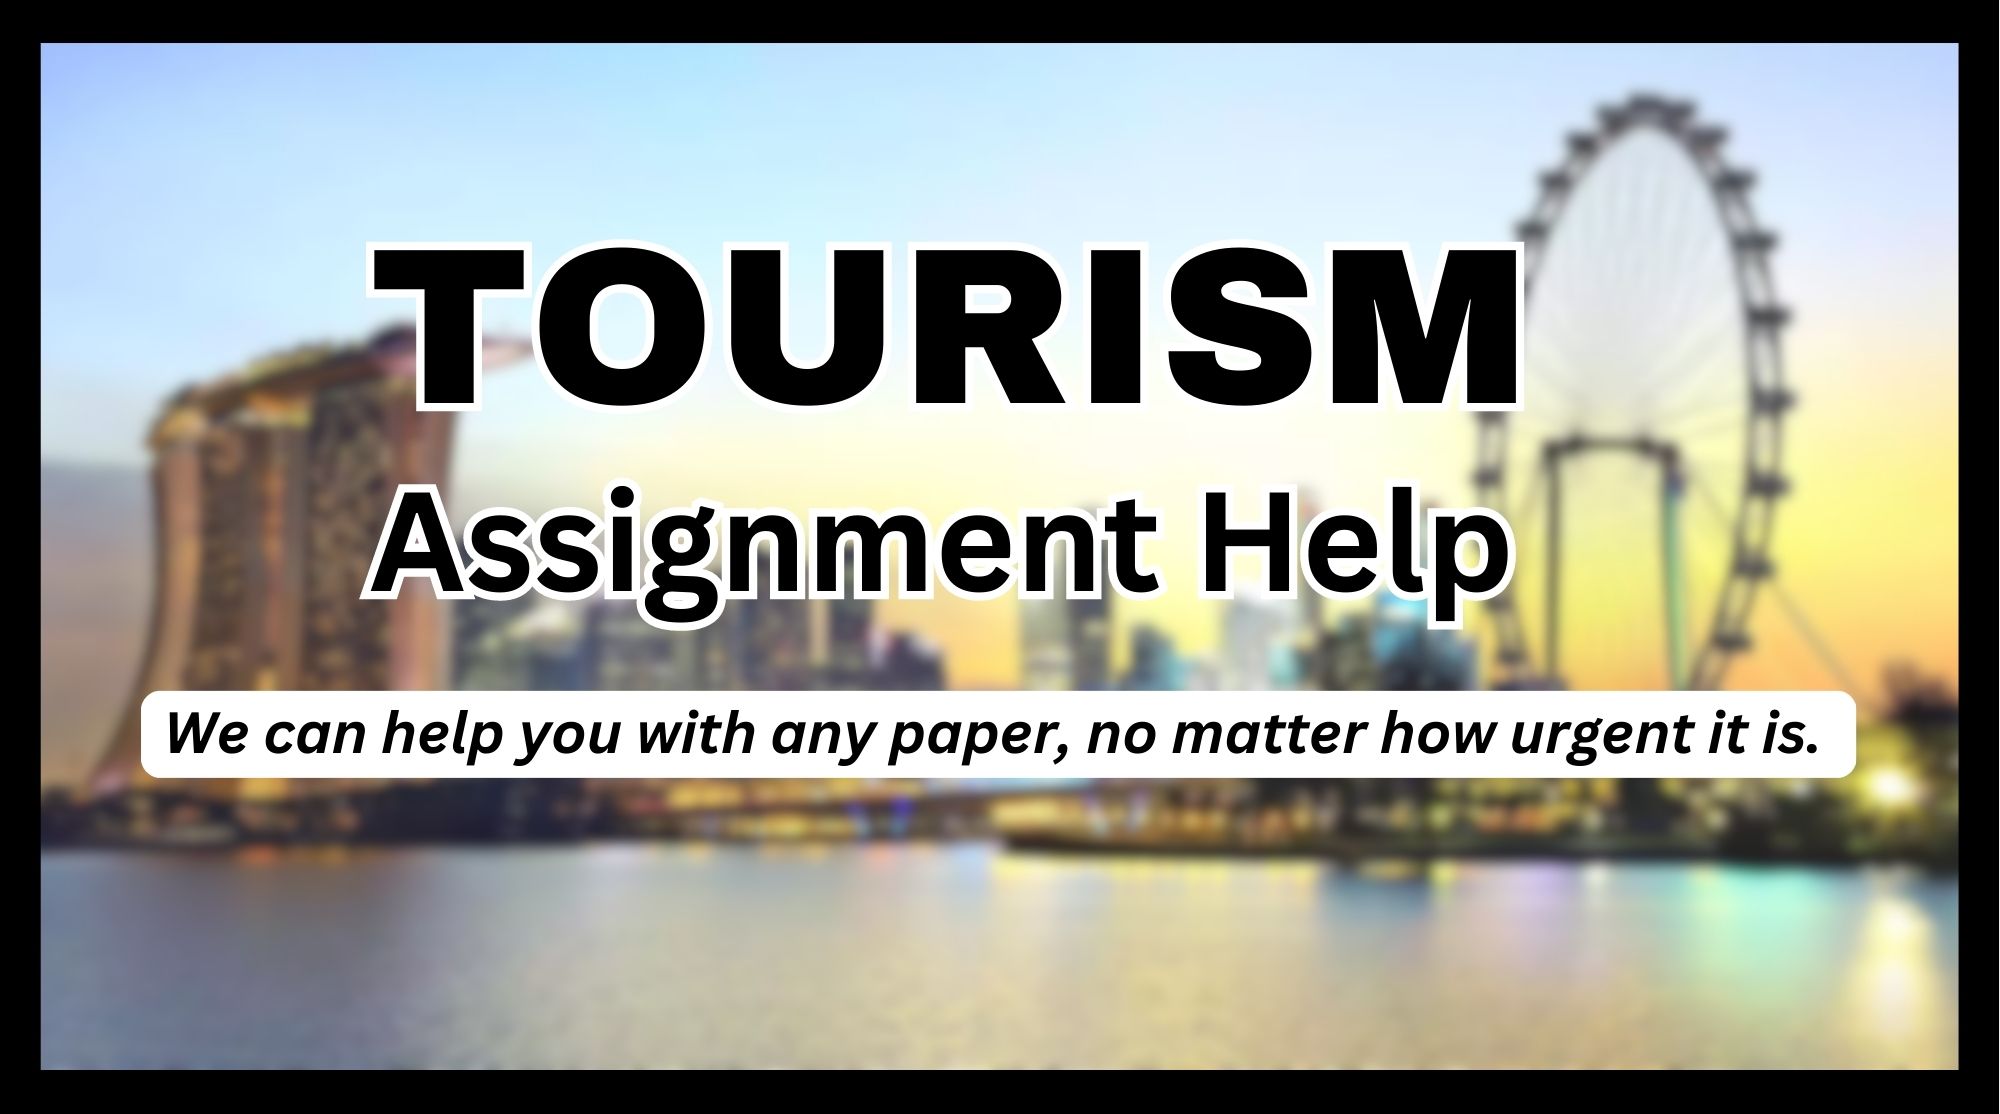 Tourism Assignment Help from Expert Helpers at BEWS